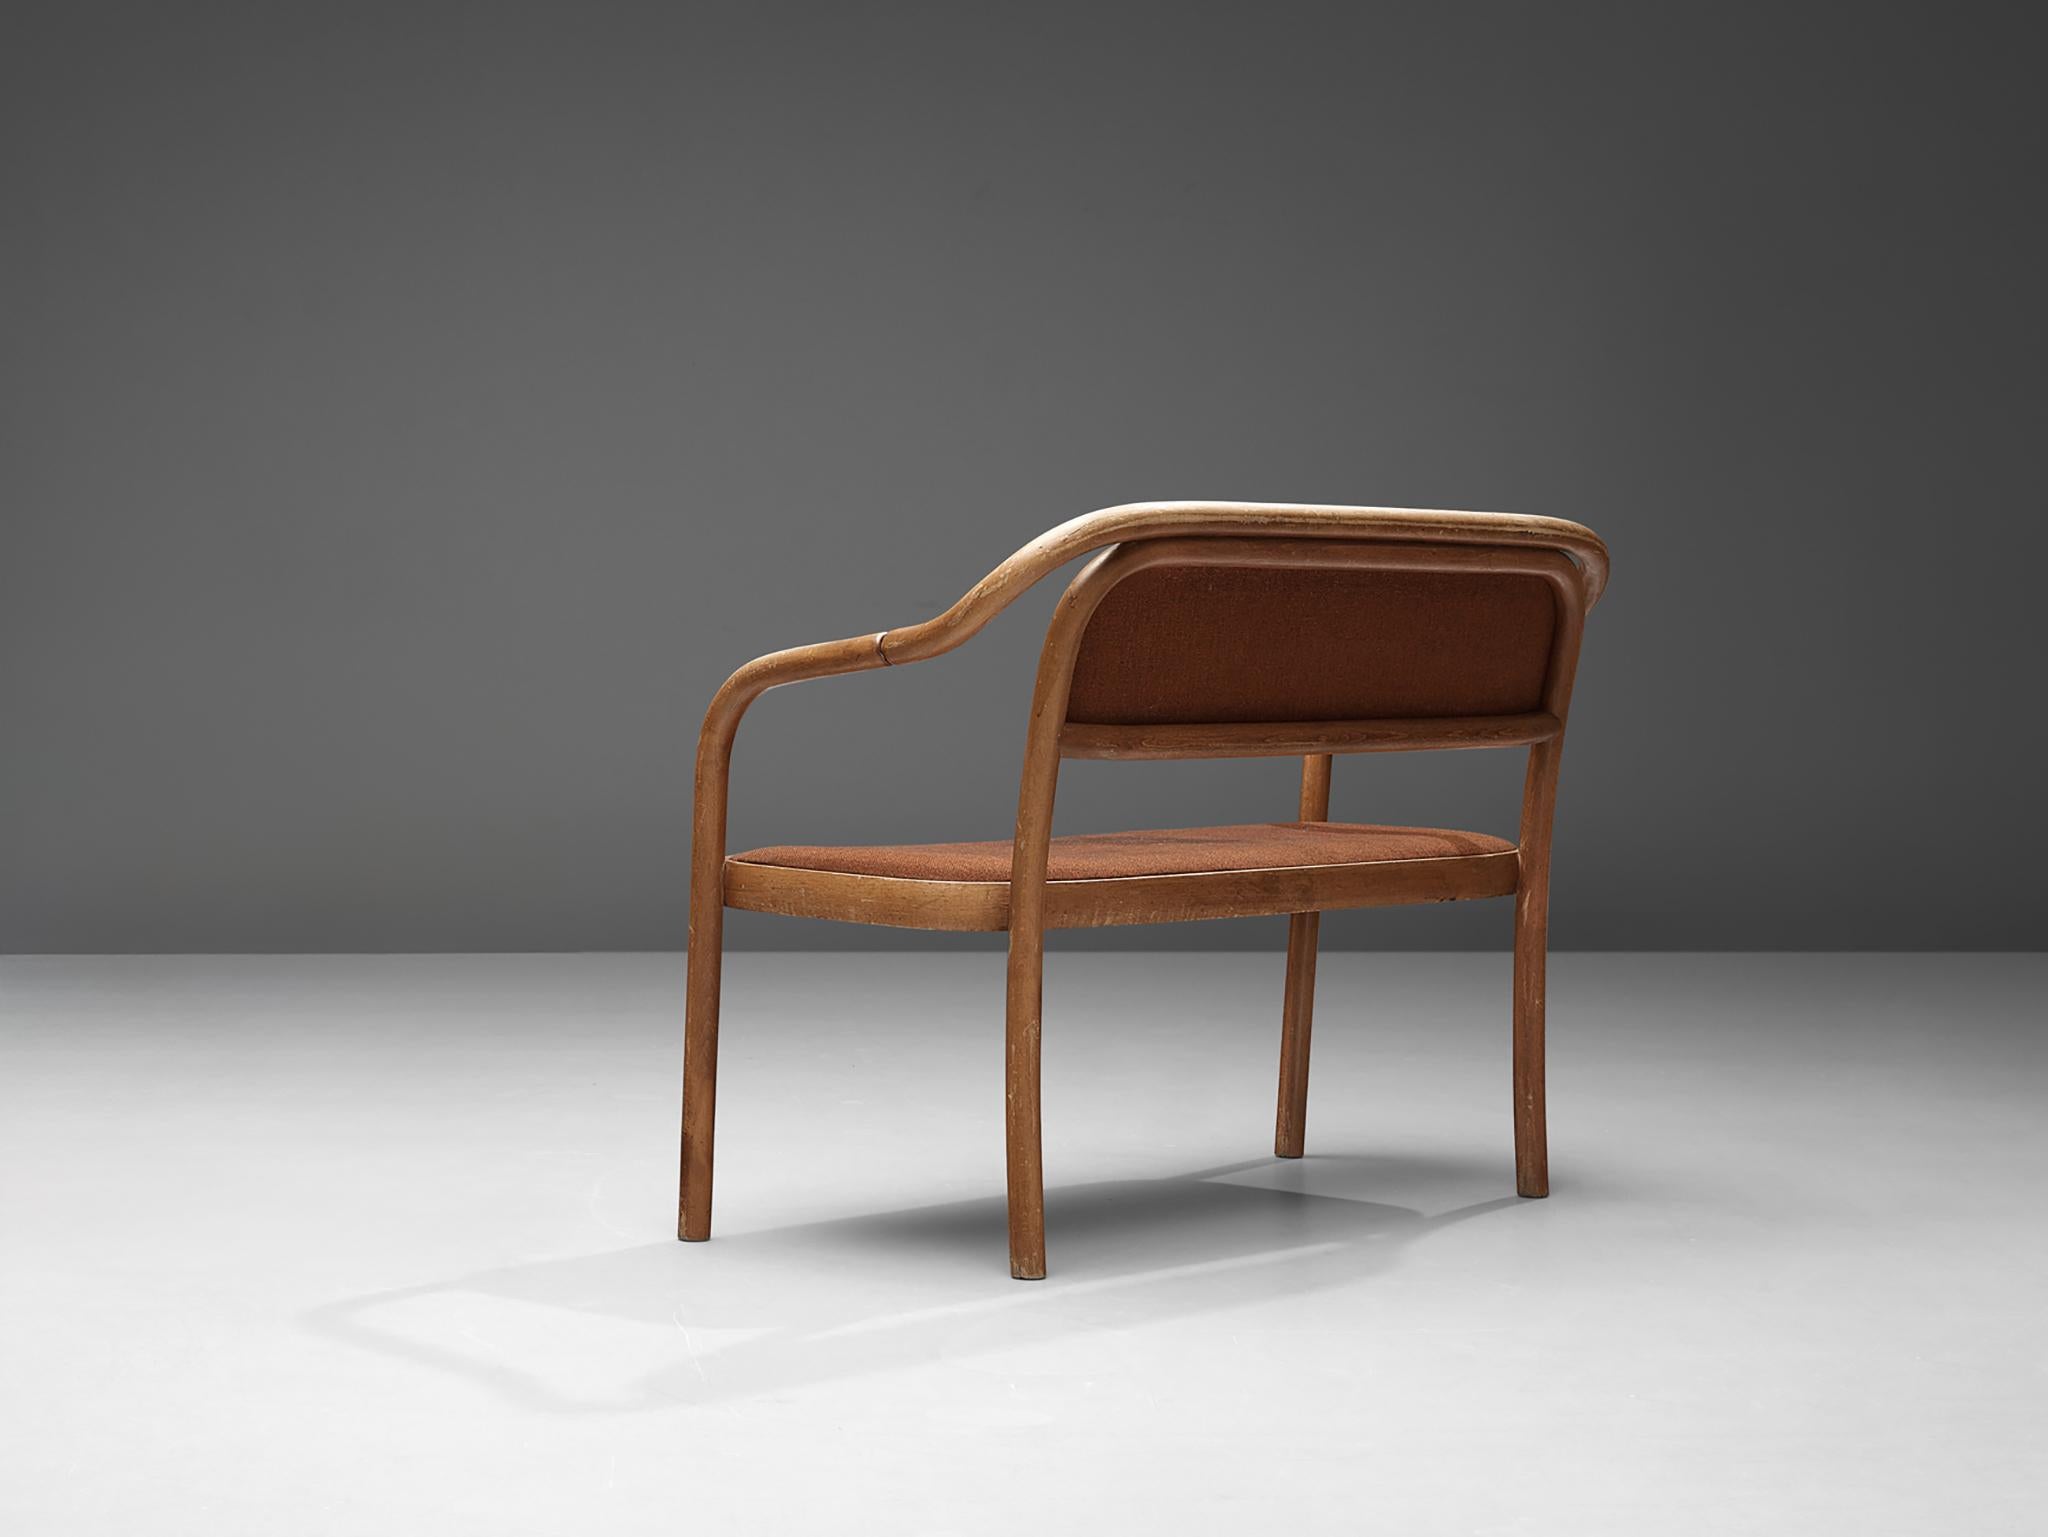 Antonín Šuman for TON, bench, bentwood, fabric upholstery, Czech Republic, 1977

Admirable bench designed by Antonín Šuman and manufactured by TON in the 1970s. The bench features a wonderful bentwood frame. Engraved rings add a subtle detail to the